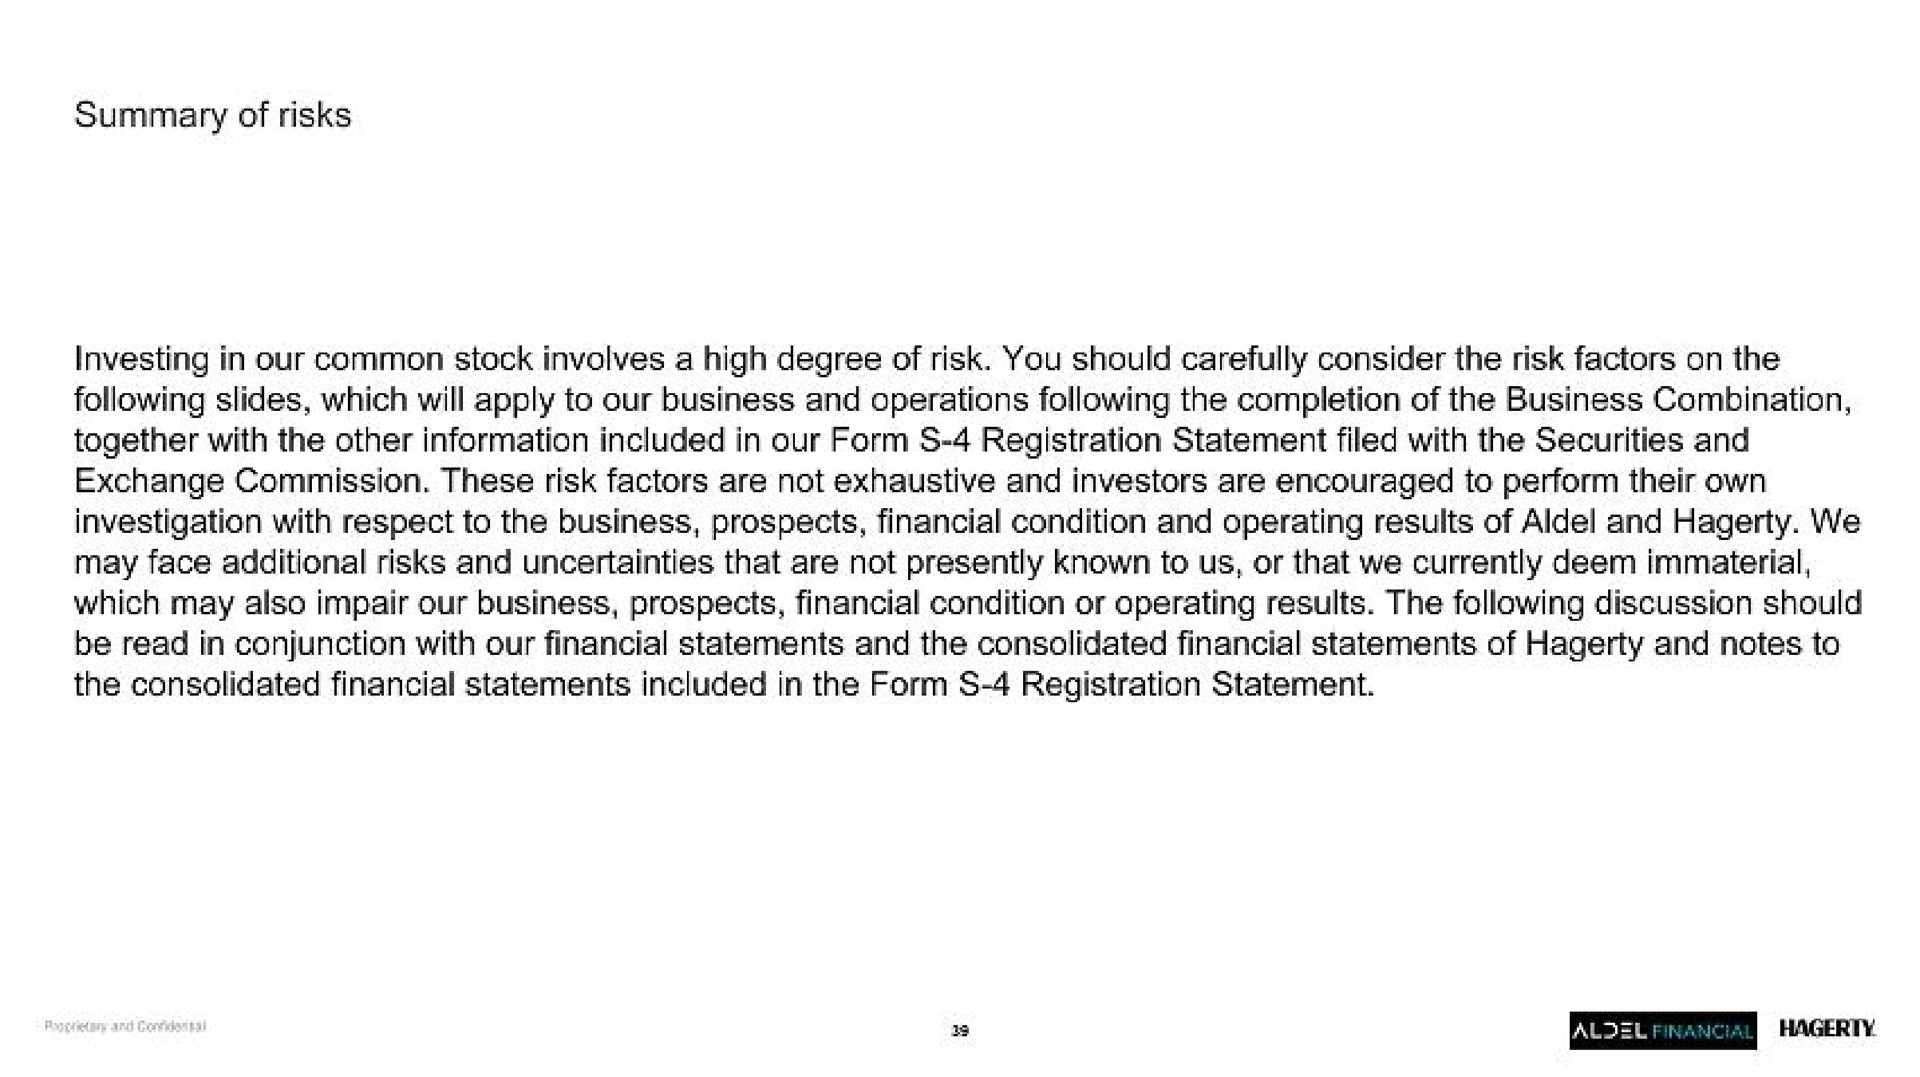 summary of risks investing in our common stock involves a high degree of risk you should carefully consider the risk factors on the following slides which will apply to our business and operations following the completion of the business combination together with the other information included in our form registration statement filed with the securities and exchange commission these risk factors are not exhaustive and investors are encouraged to perform their own investigation with respect to the business prospects financial condition and operating results of and we may face additional risks and uncertainties that are not presently known to us or that we currently deem immaterial which may also impair our business prospects financial condition or operating results the following discussion should be read in conjunction with our financial statements and the consolidated financial statements of and notes to the consolidated financial statements included in the form registration statement | Hagerty